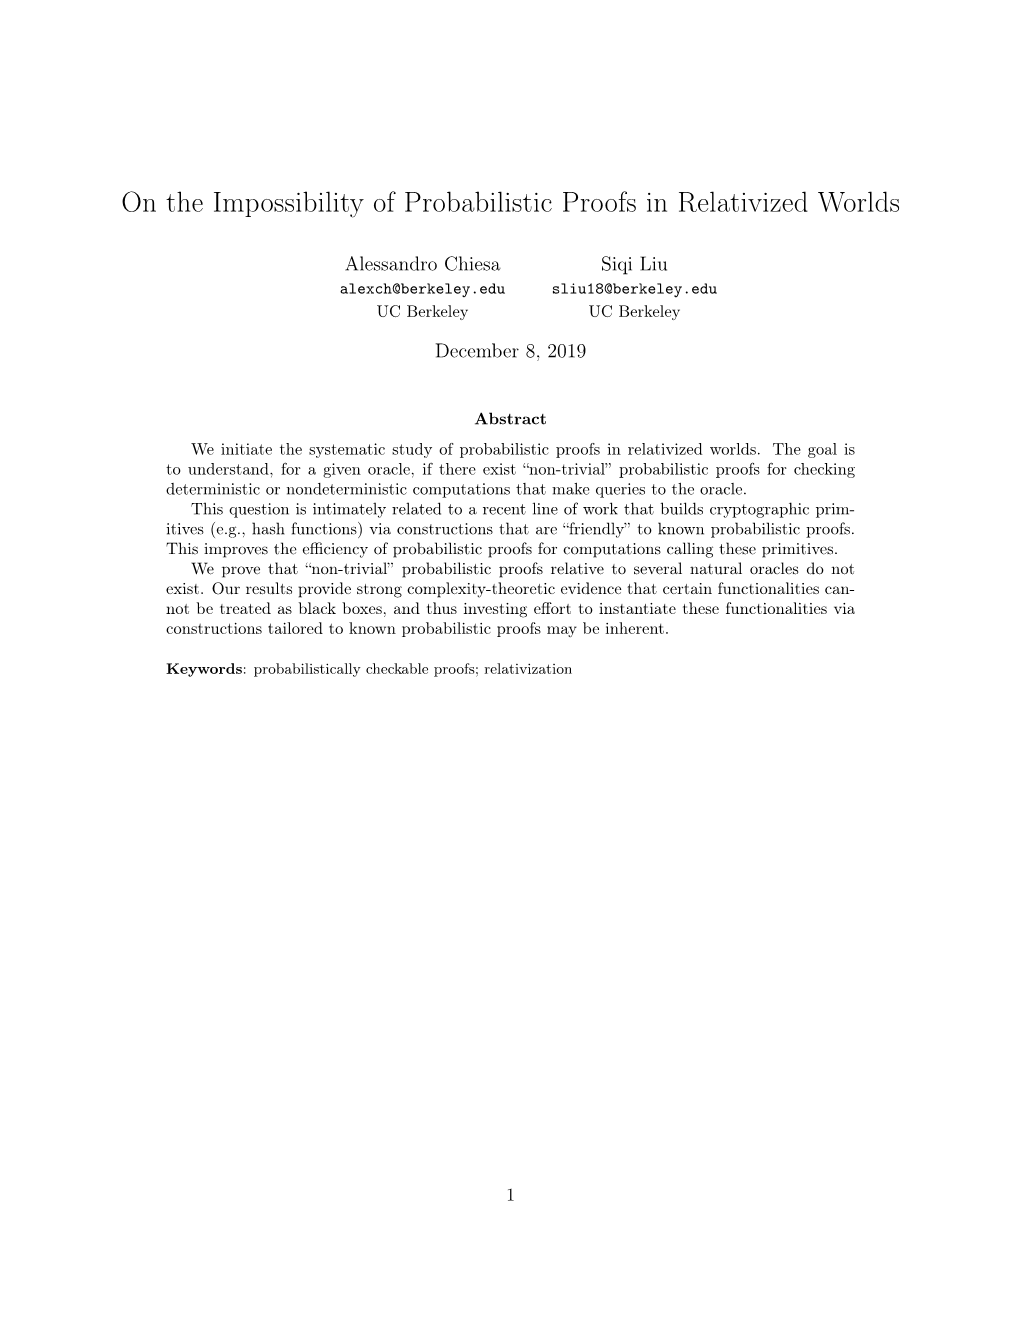 On the Impossibility of Probabilistic Proofs in Relativized Worlds